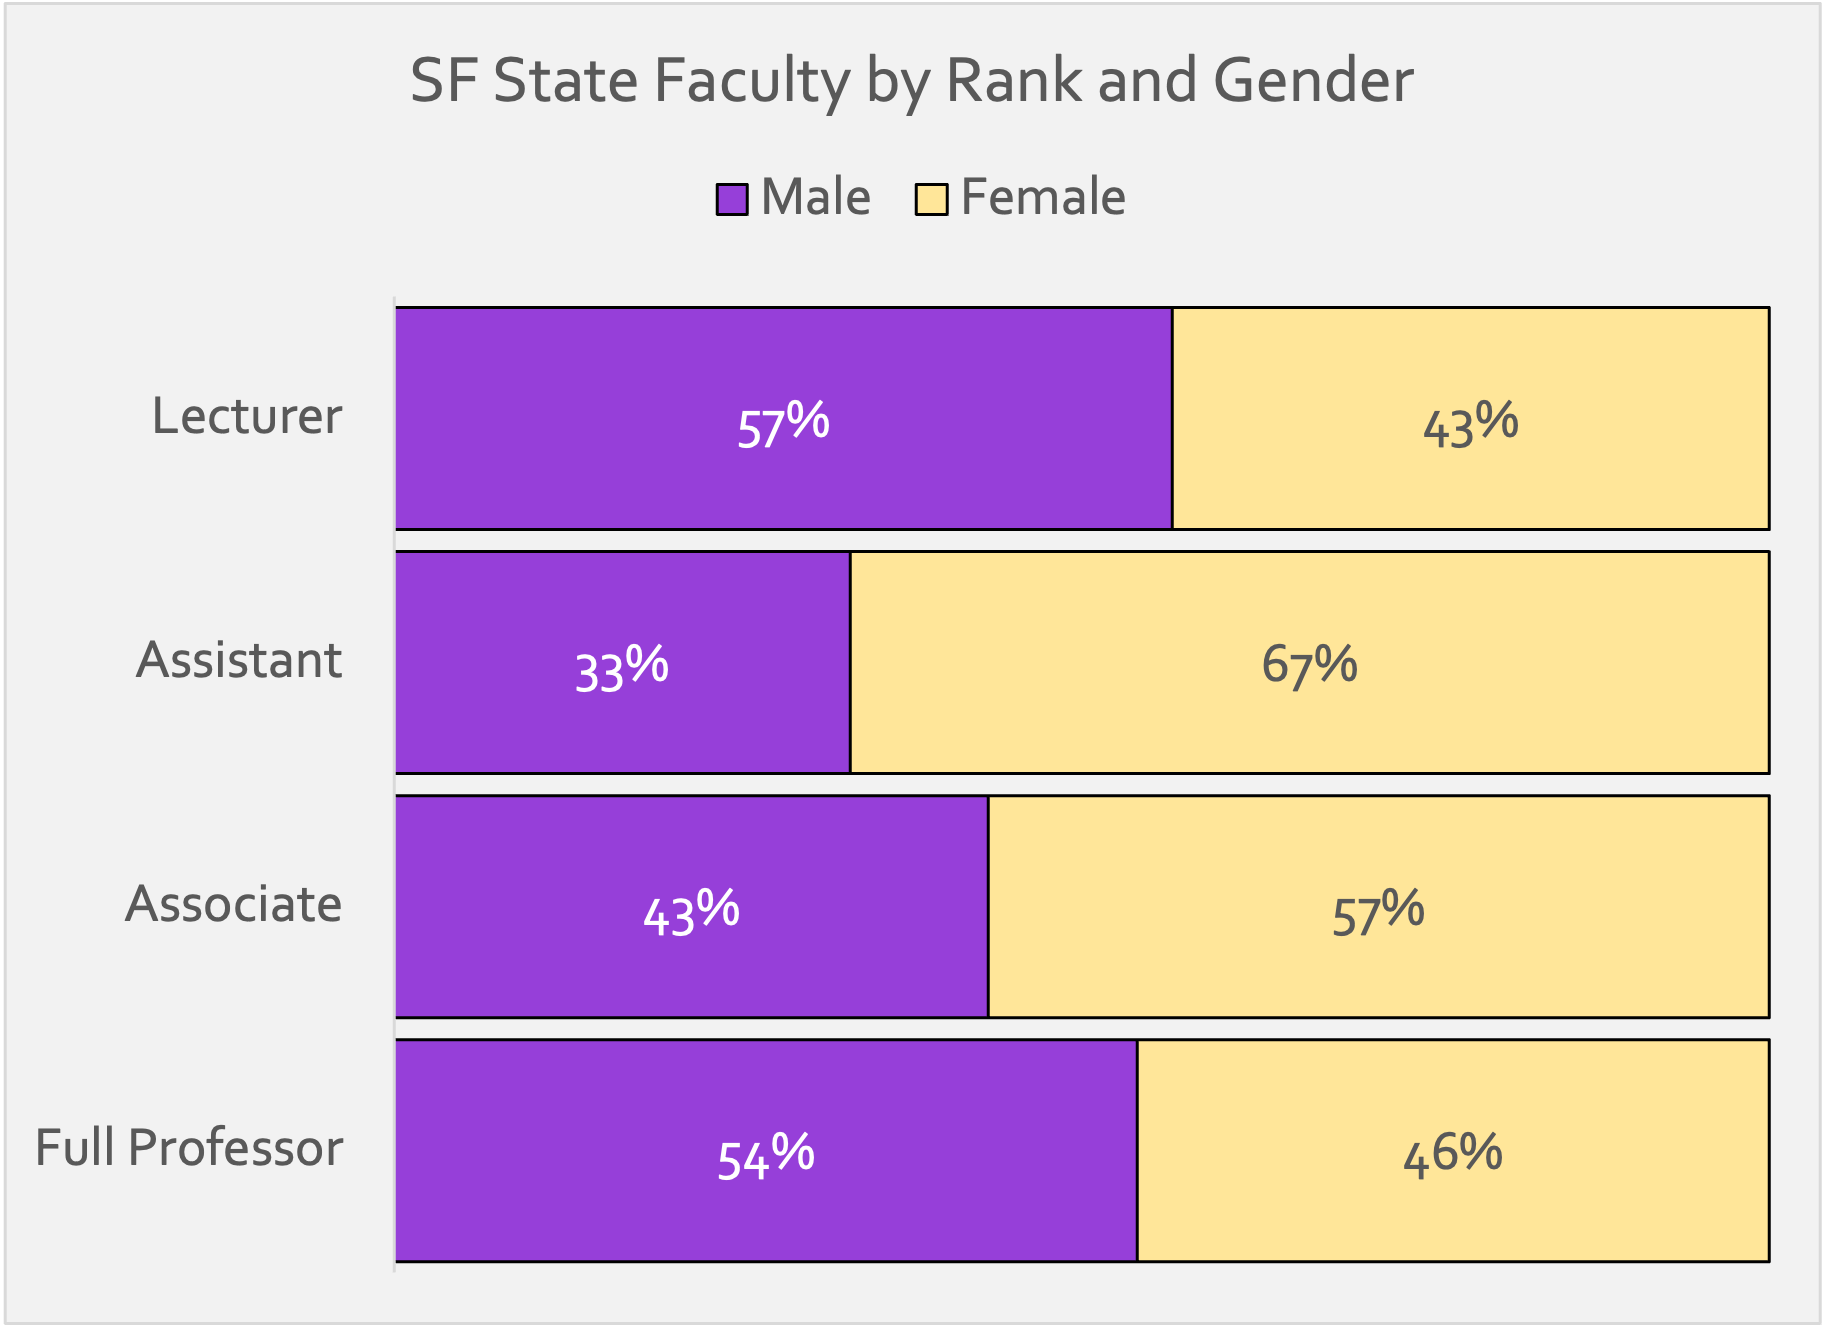 SF State Faculty by Rank and Gender bar graph